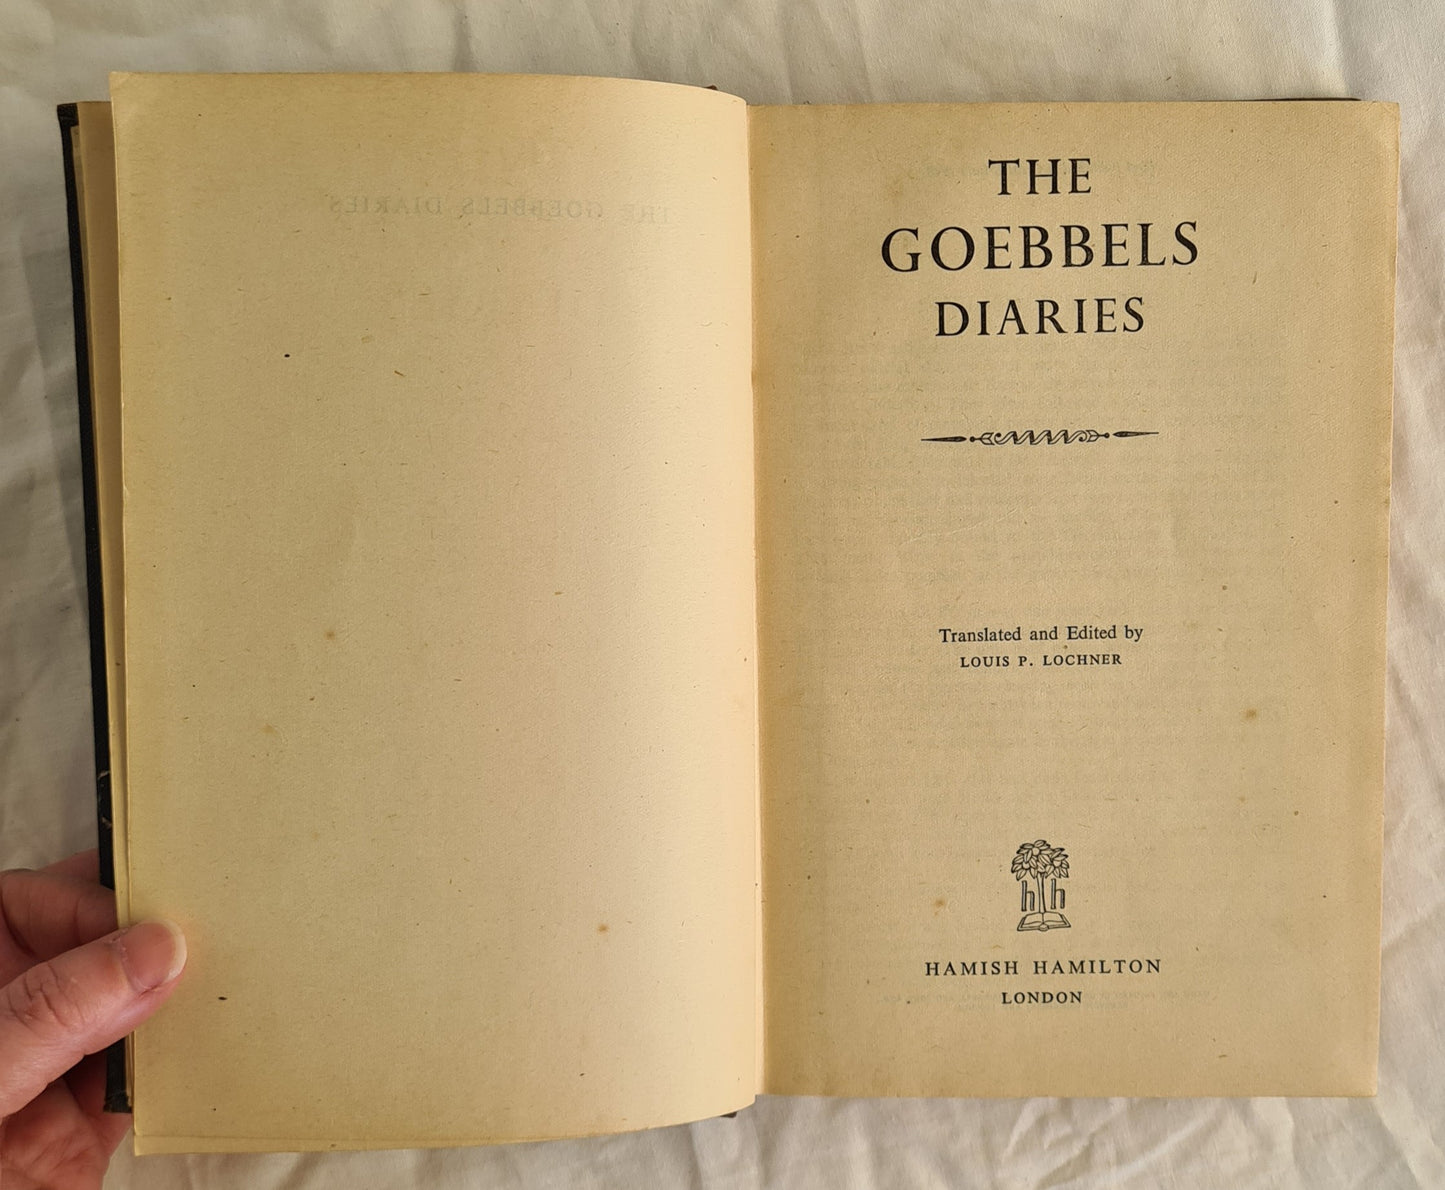 The Goebbels Diaries Translated and Edited by Louis P. Lochner